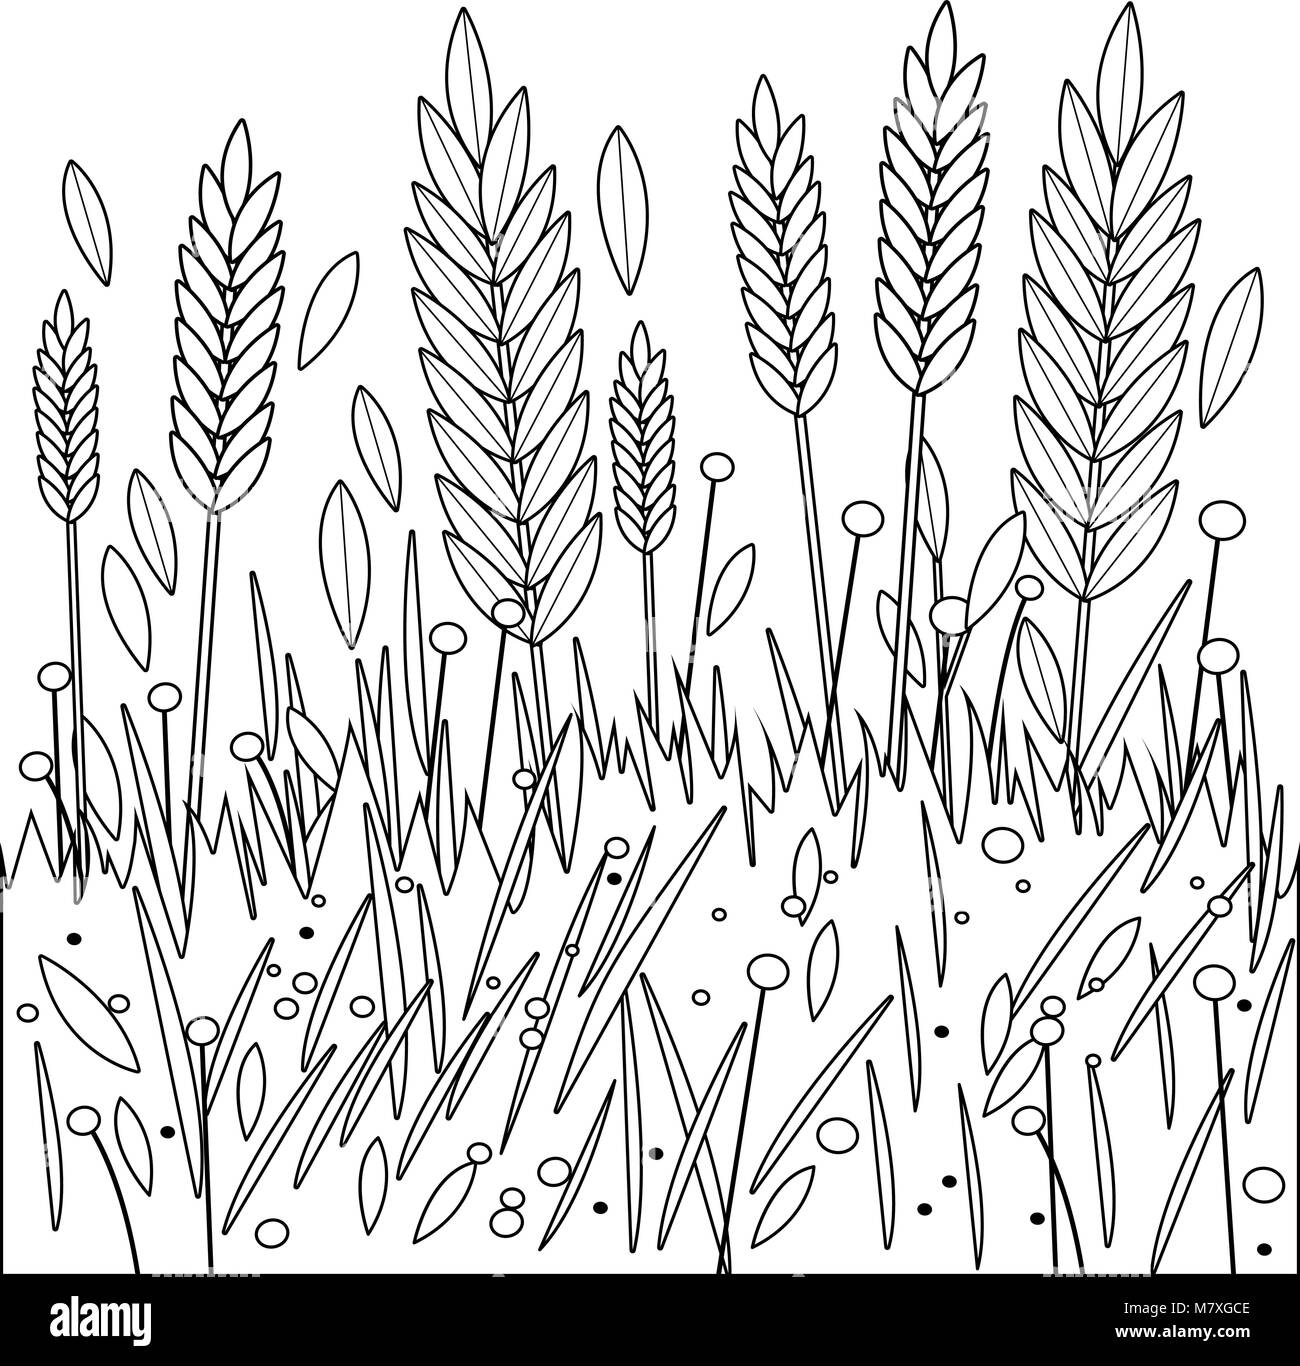 Field of wheat, barley or rye. Black and white coloring book page Stock Vector